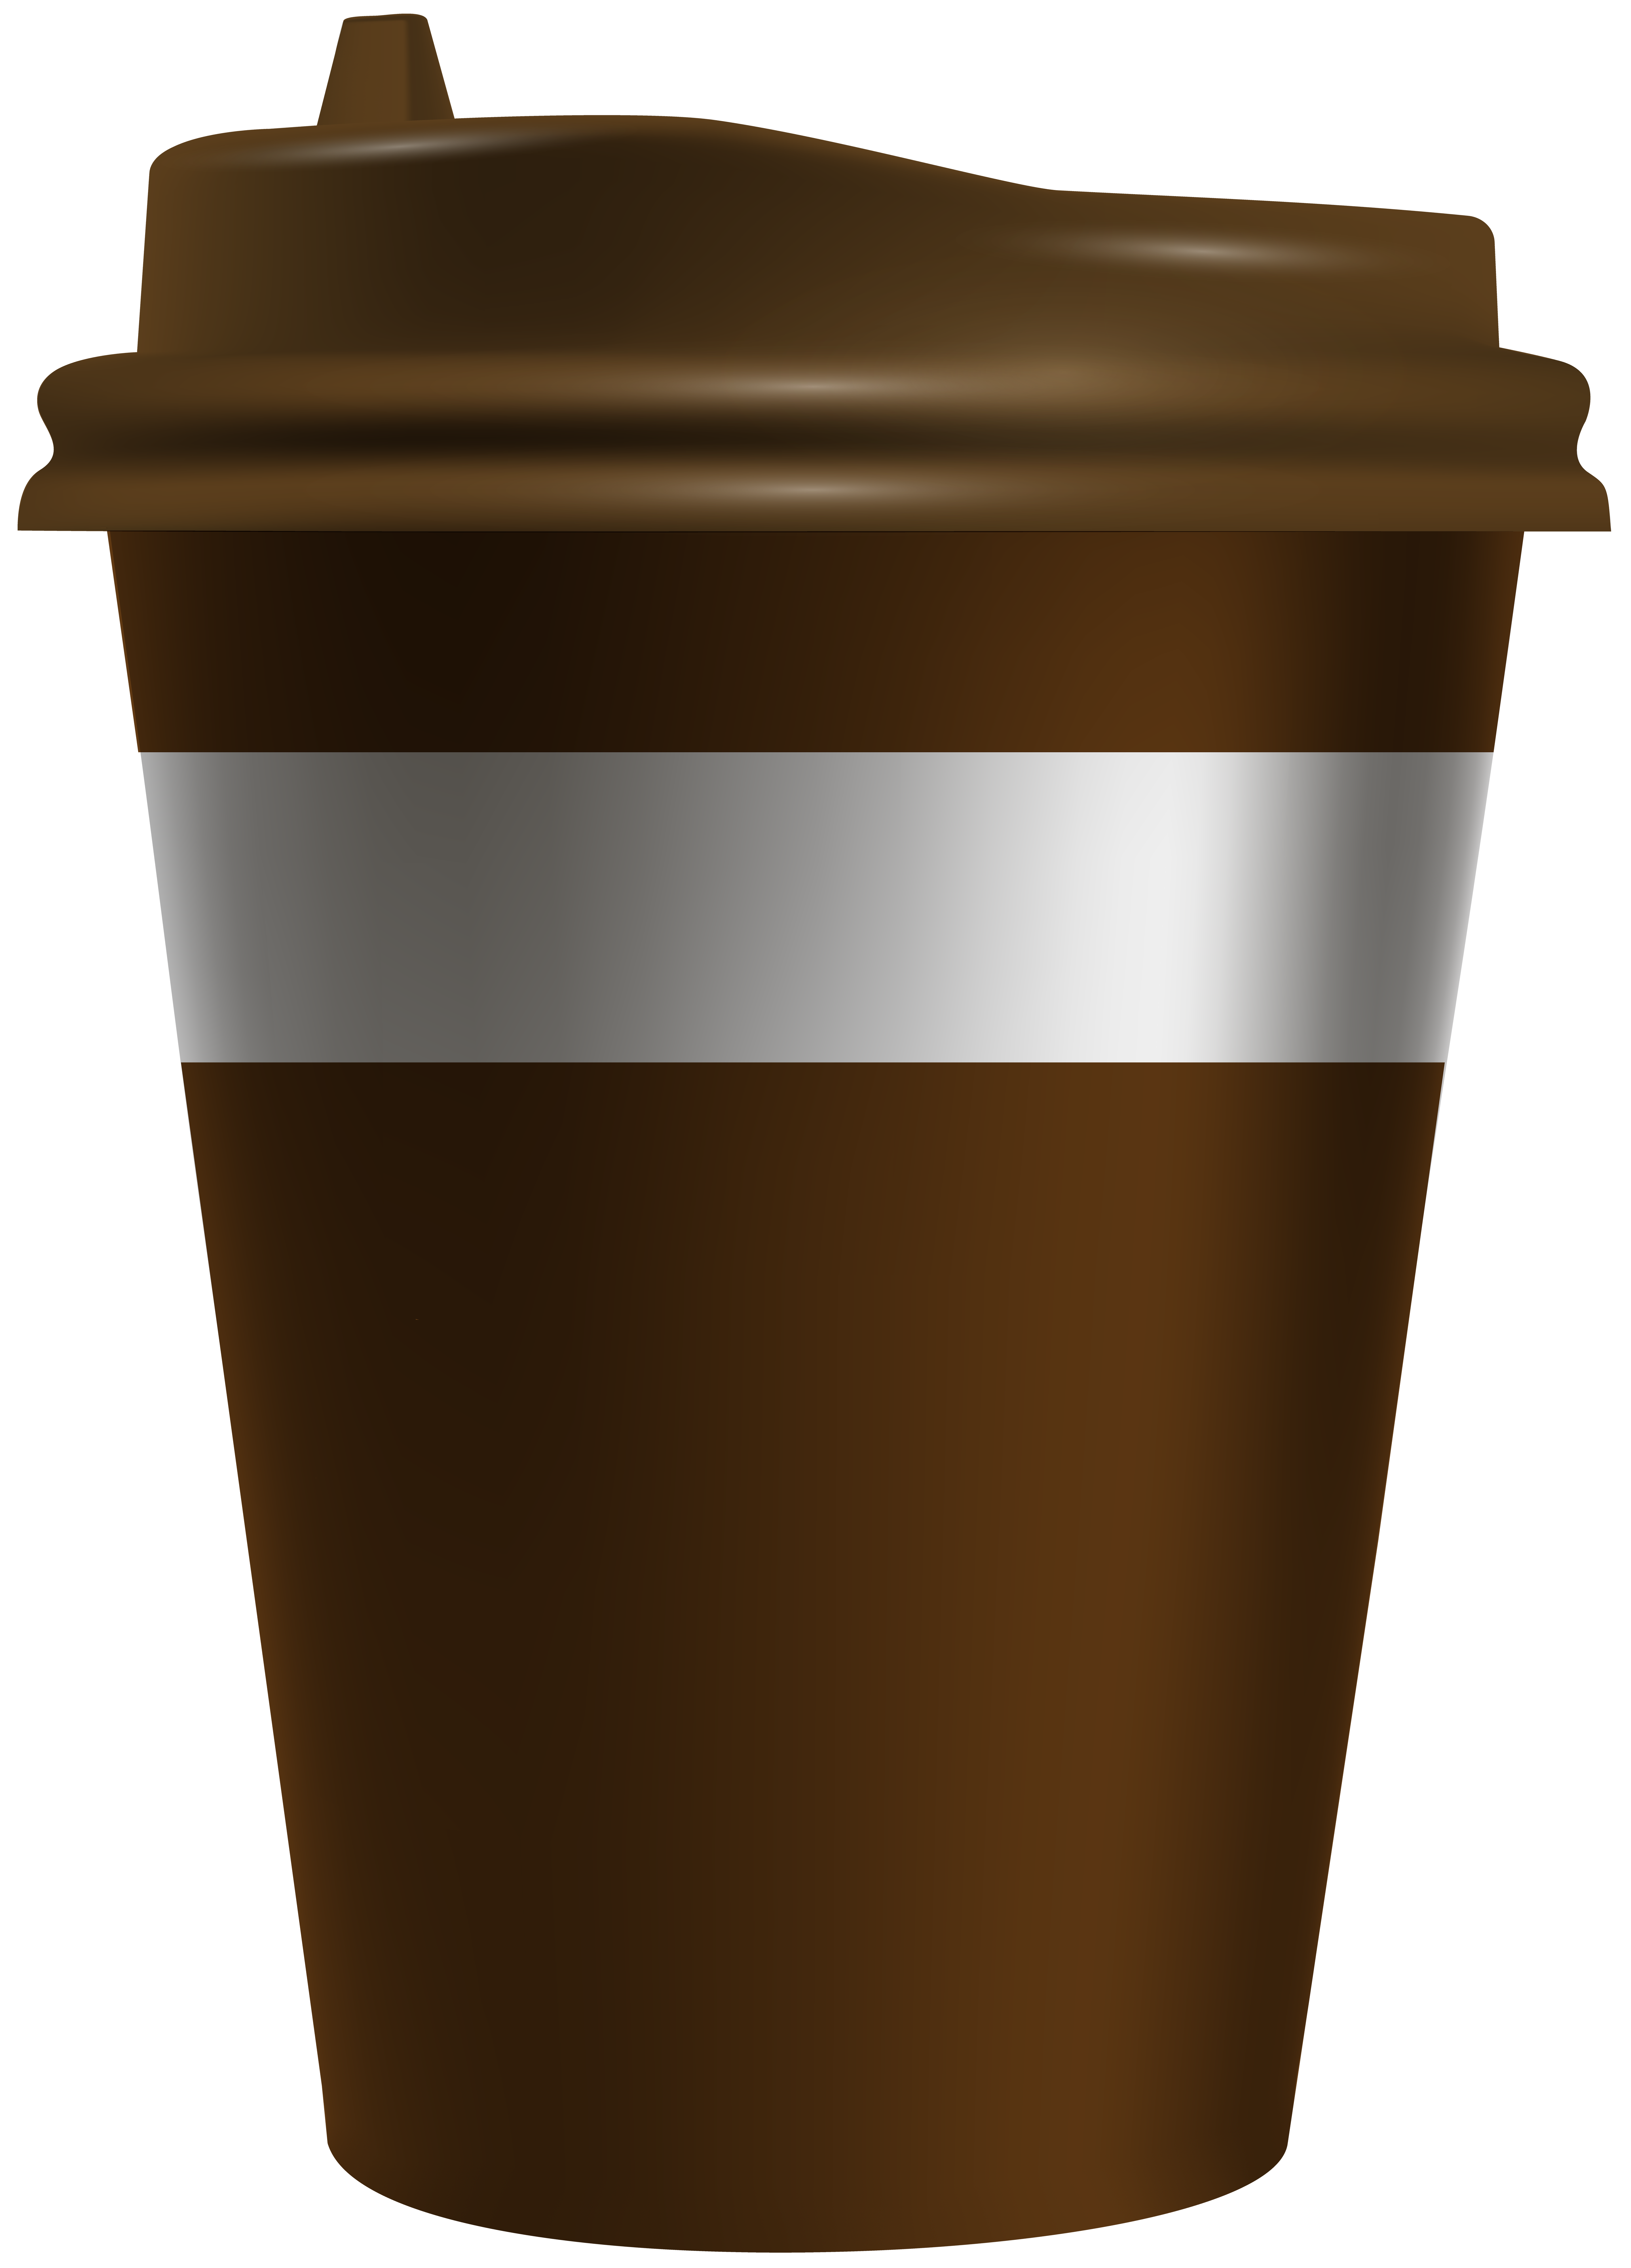 Coffee Cup To Go Png Clip Art Image Gallery Yopriceville High Quality Images And Transparent Png Free Clipart